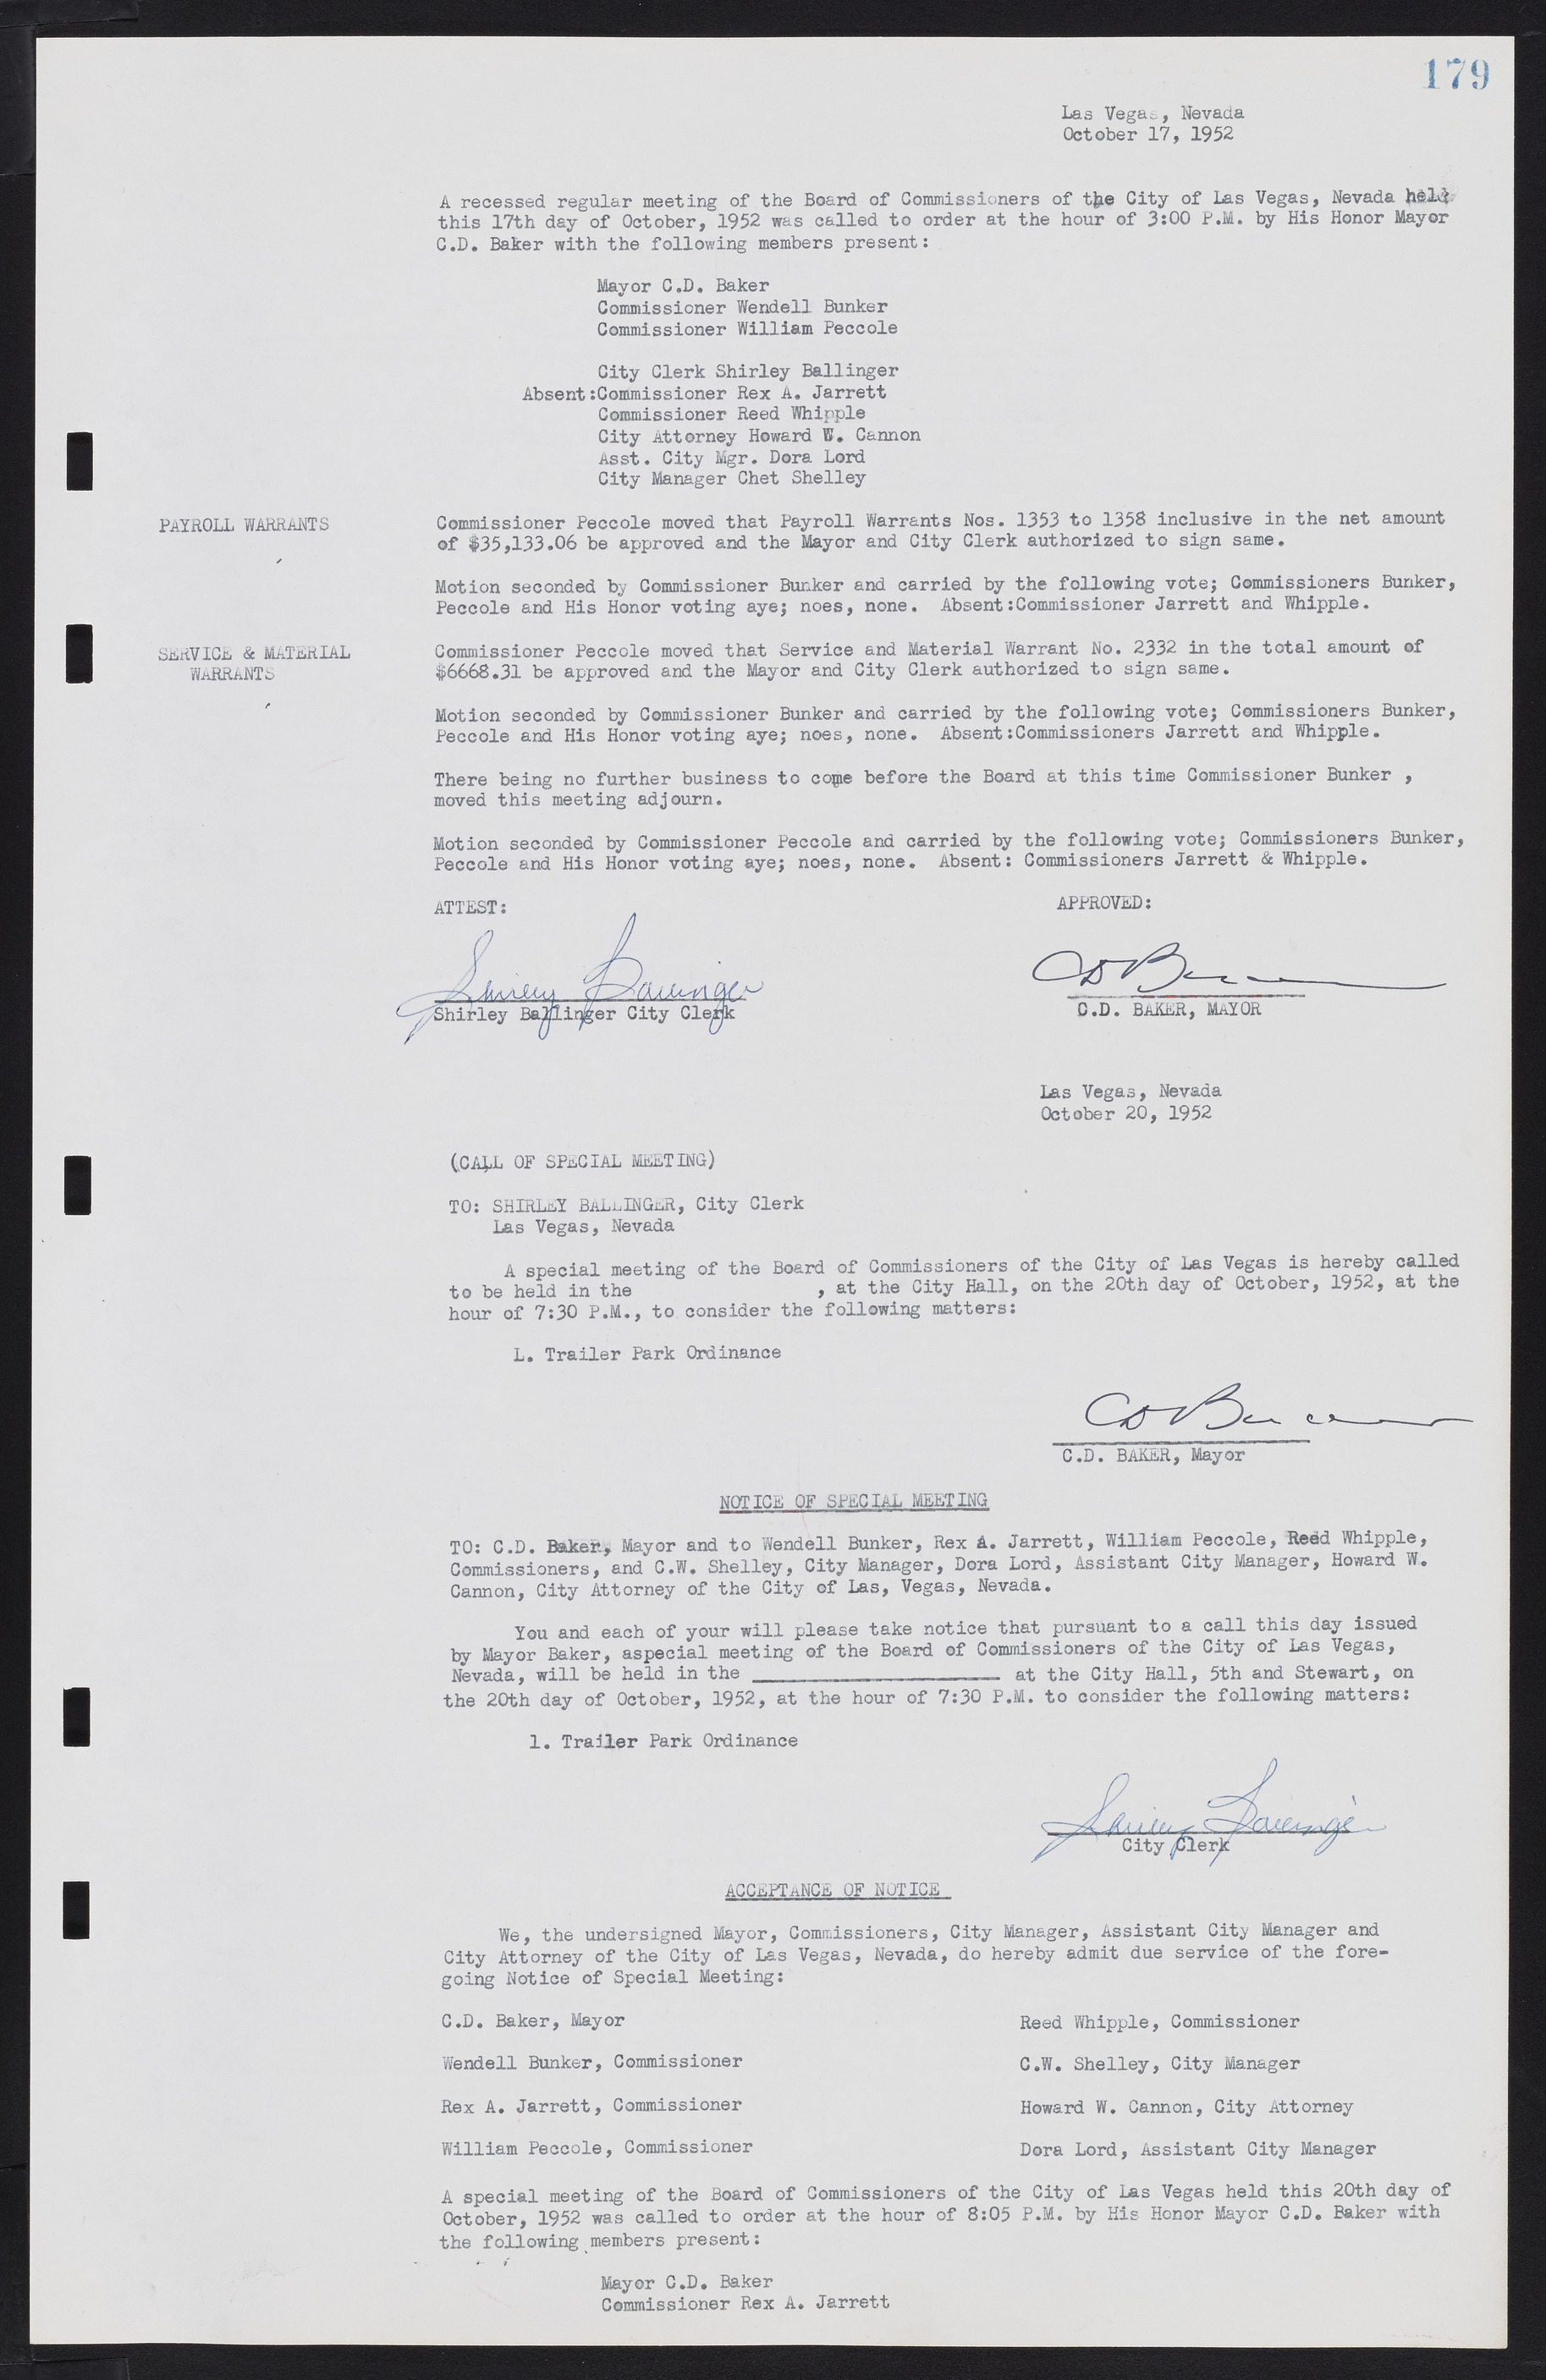 Las Vegas City Commission Minutes, May 26, 1952 to February 17, 1954, lvc000008-193